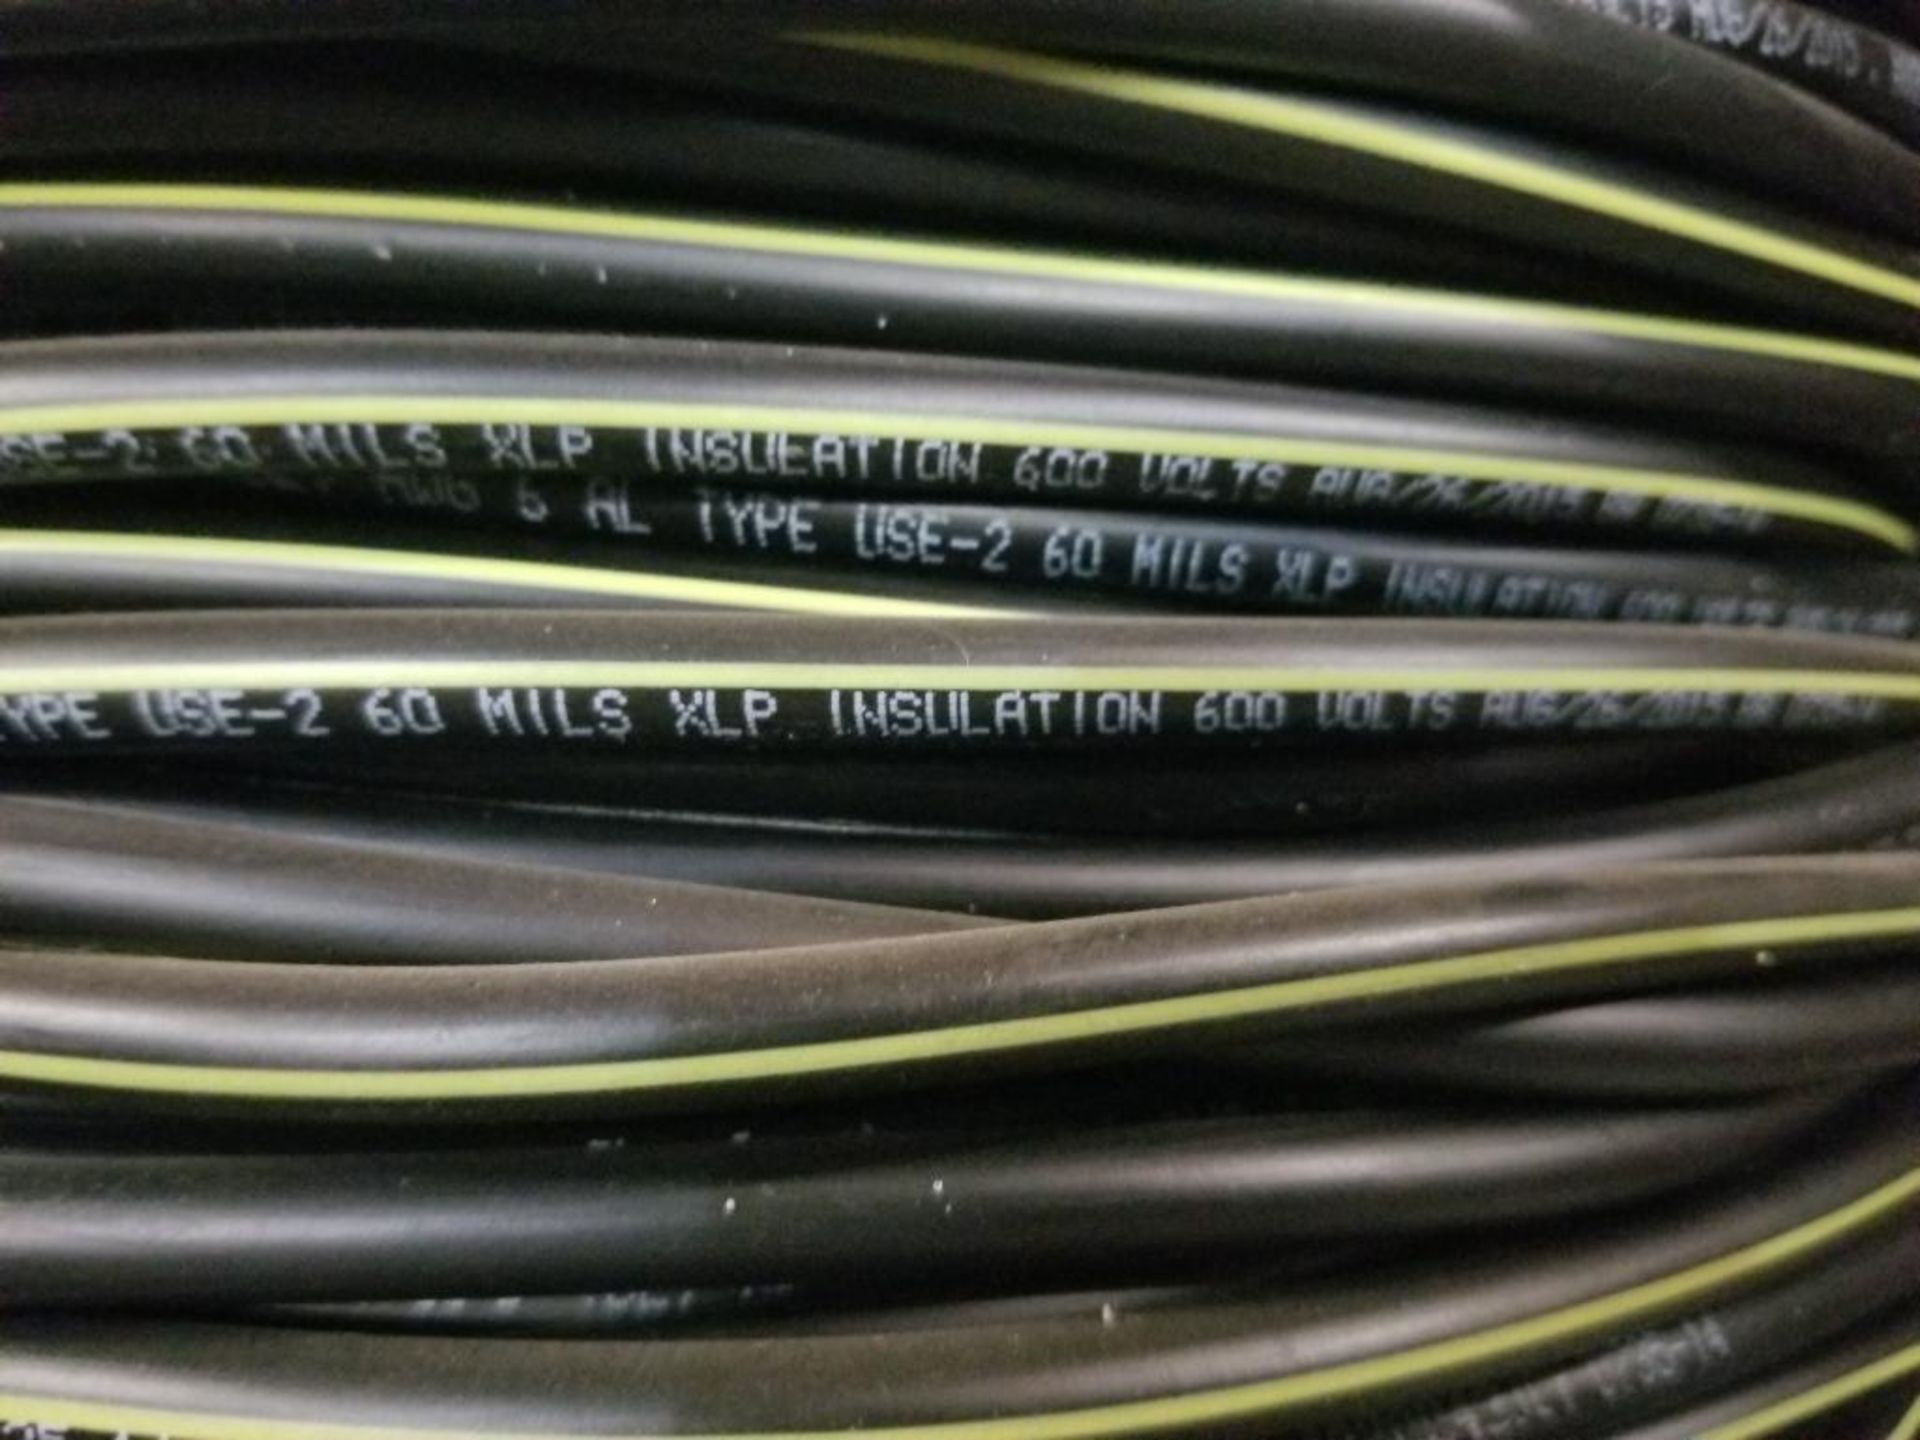 Spool of Southwire. Awg 6 AL, type use-2 60 MILS. 600v. - Image 3 of 12